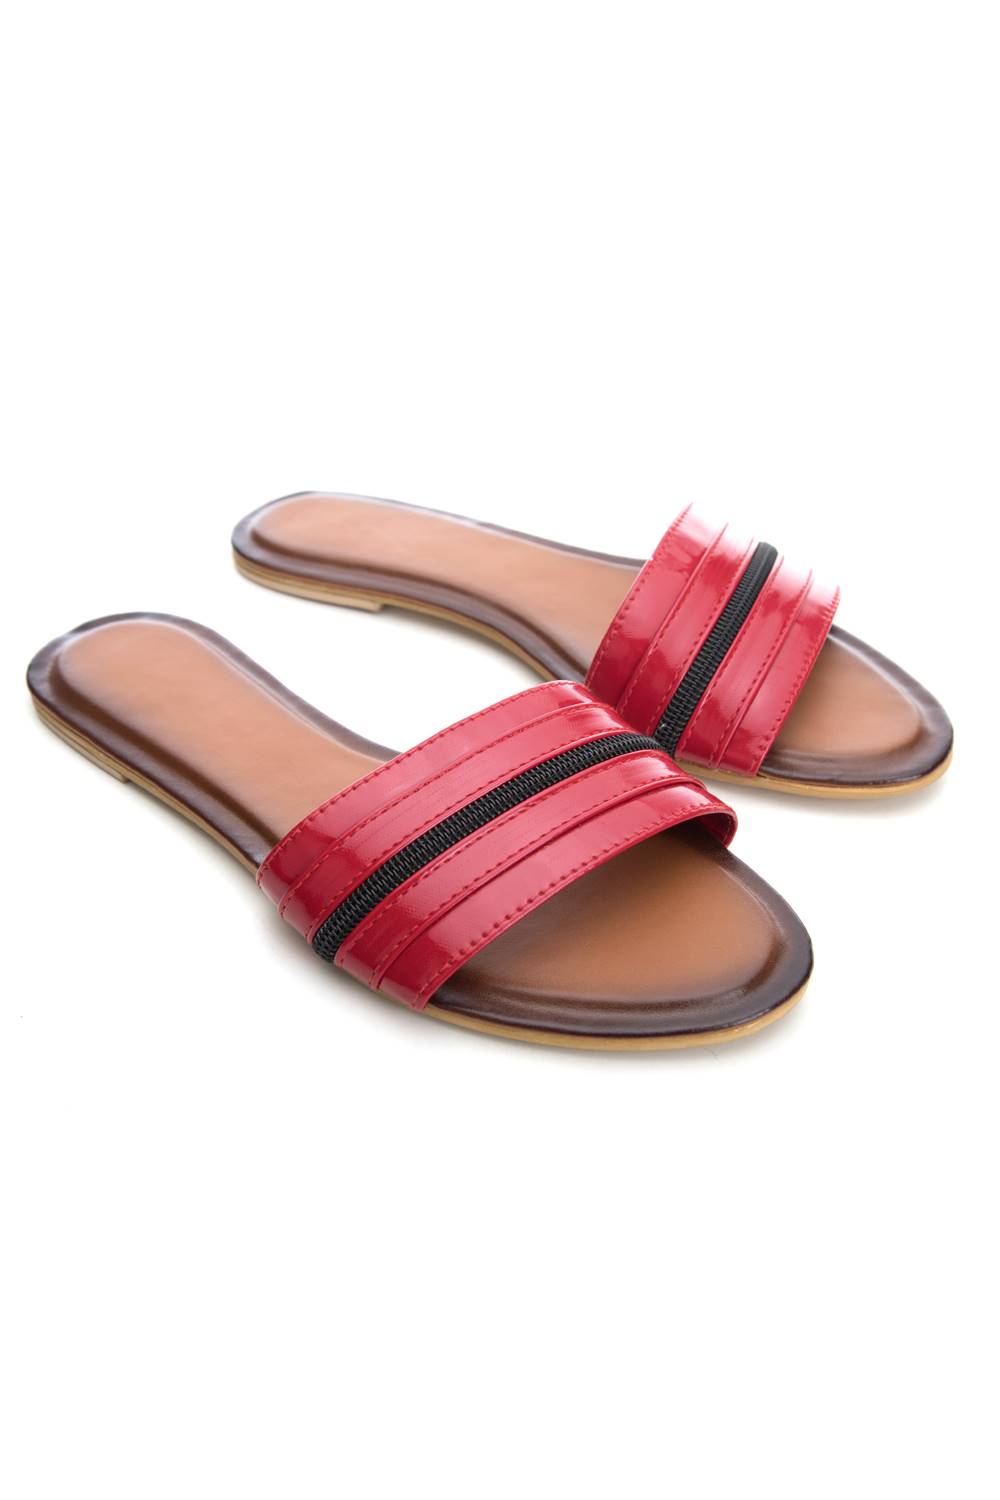 Red Patent Glossy Flat Slide Sandals2